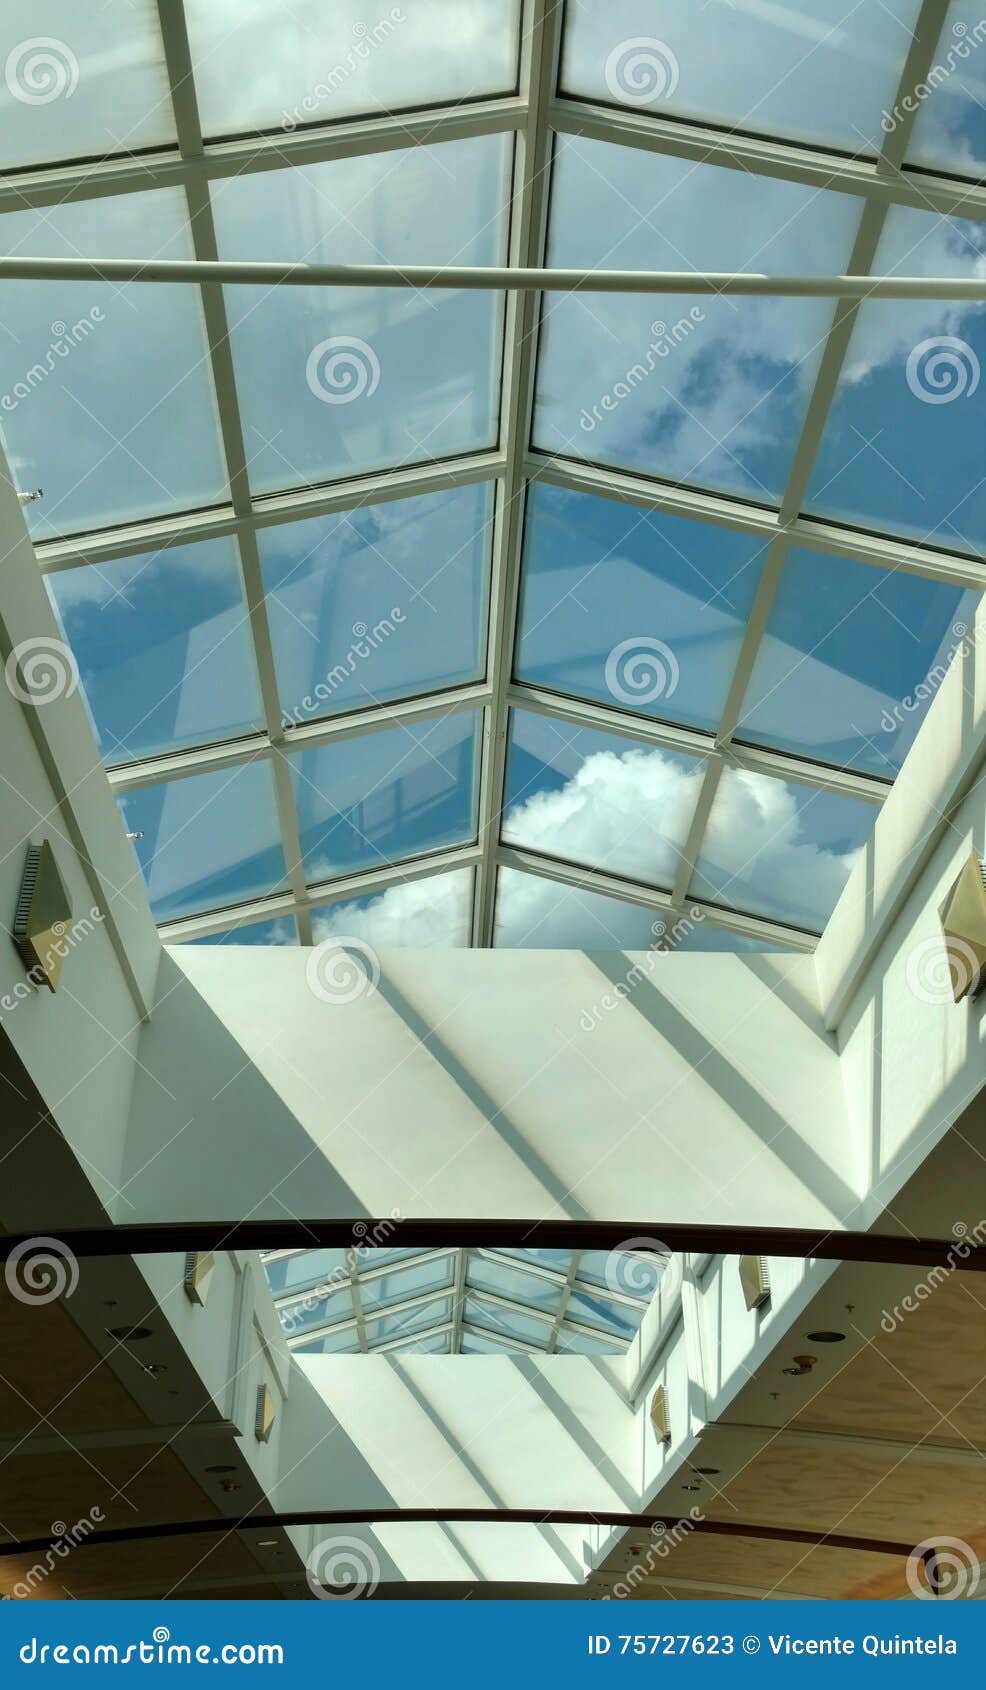 Skylight at the Mall stock image. Image of riverside - 75727623